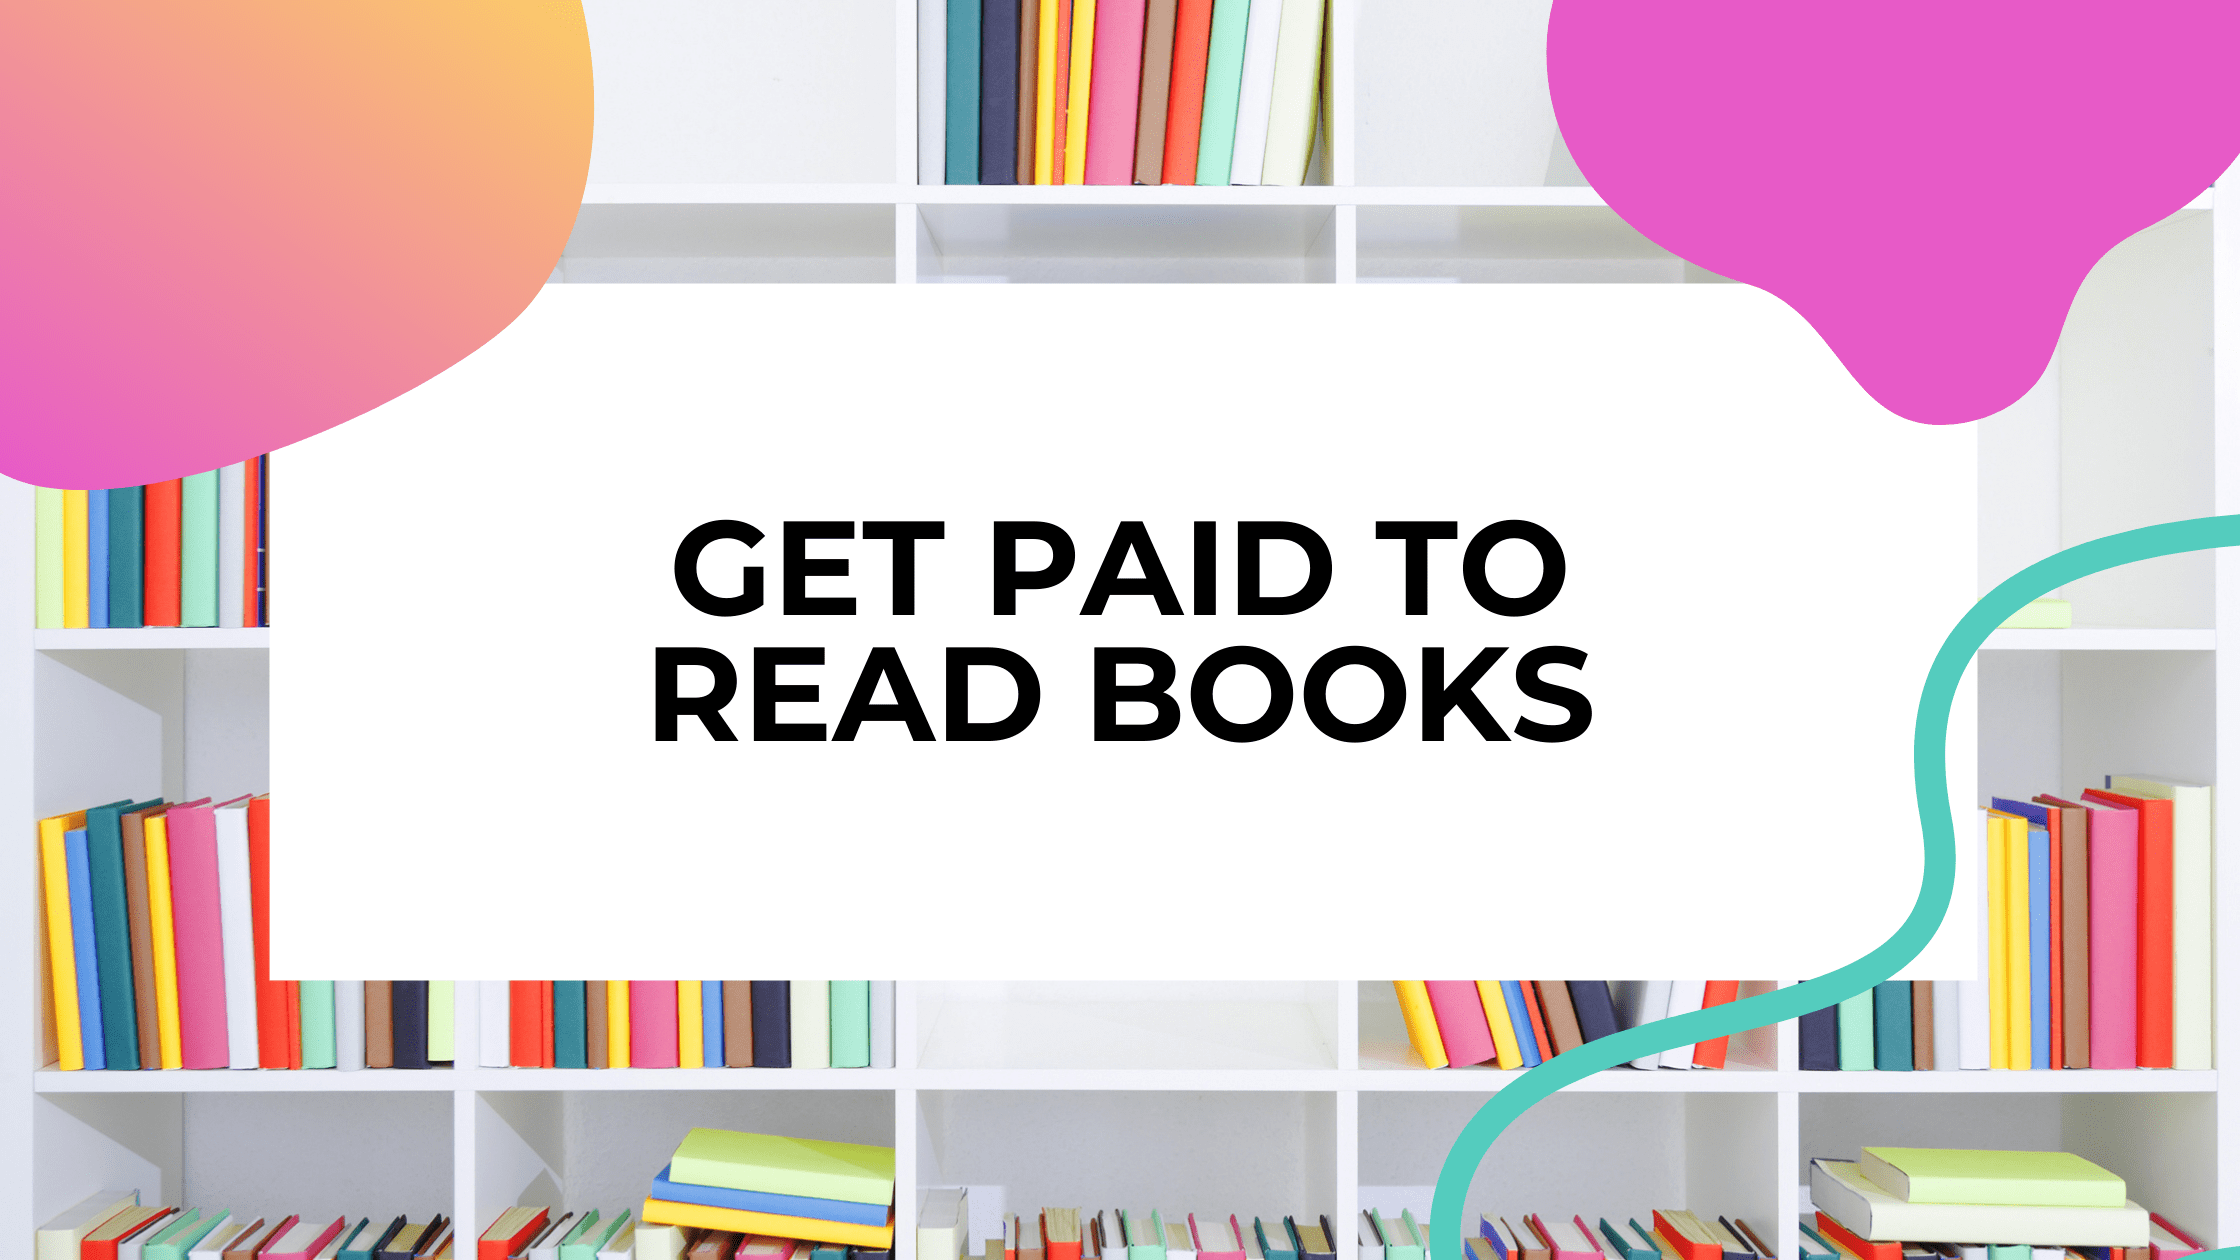 Get Paid to Read Books: 15 Ways to Make Money Reading Books